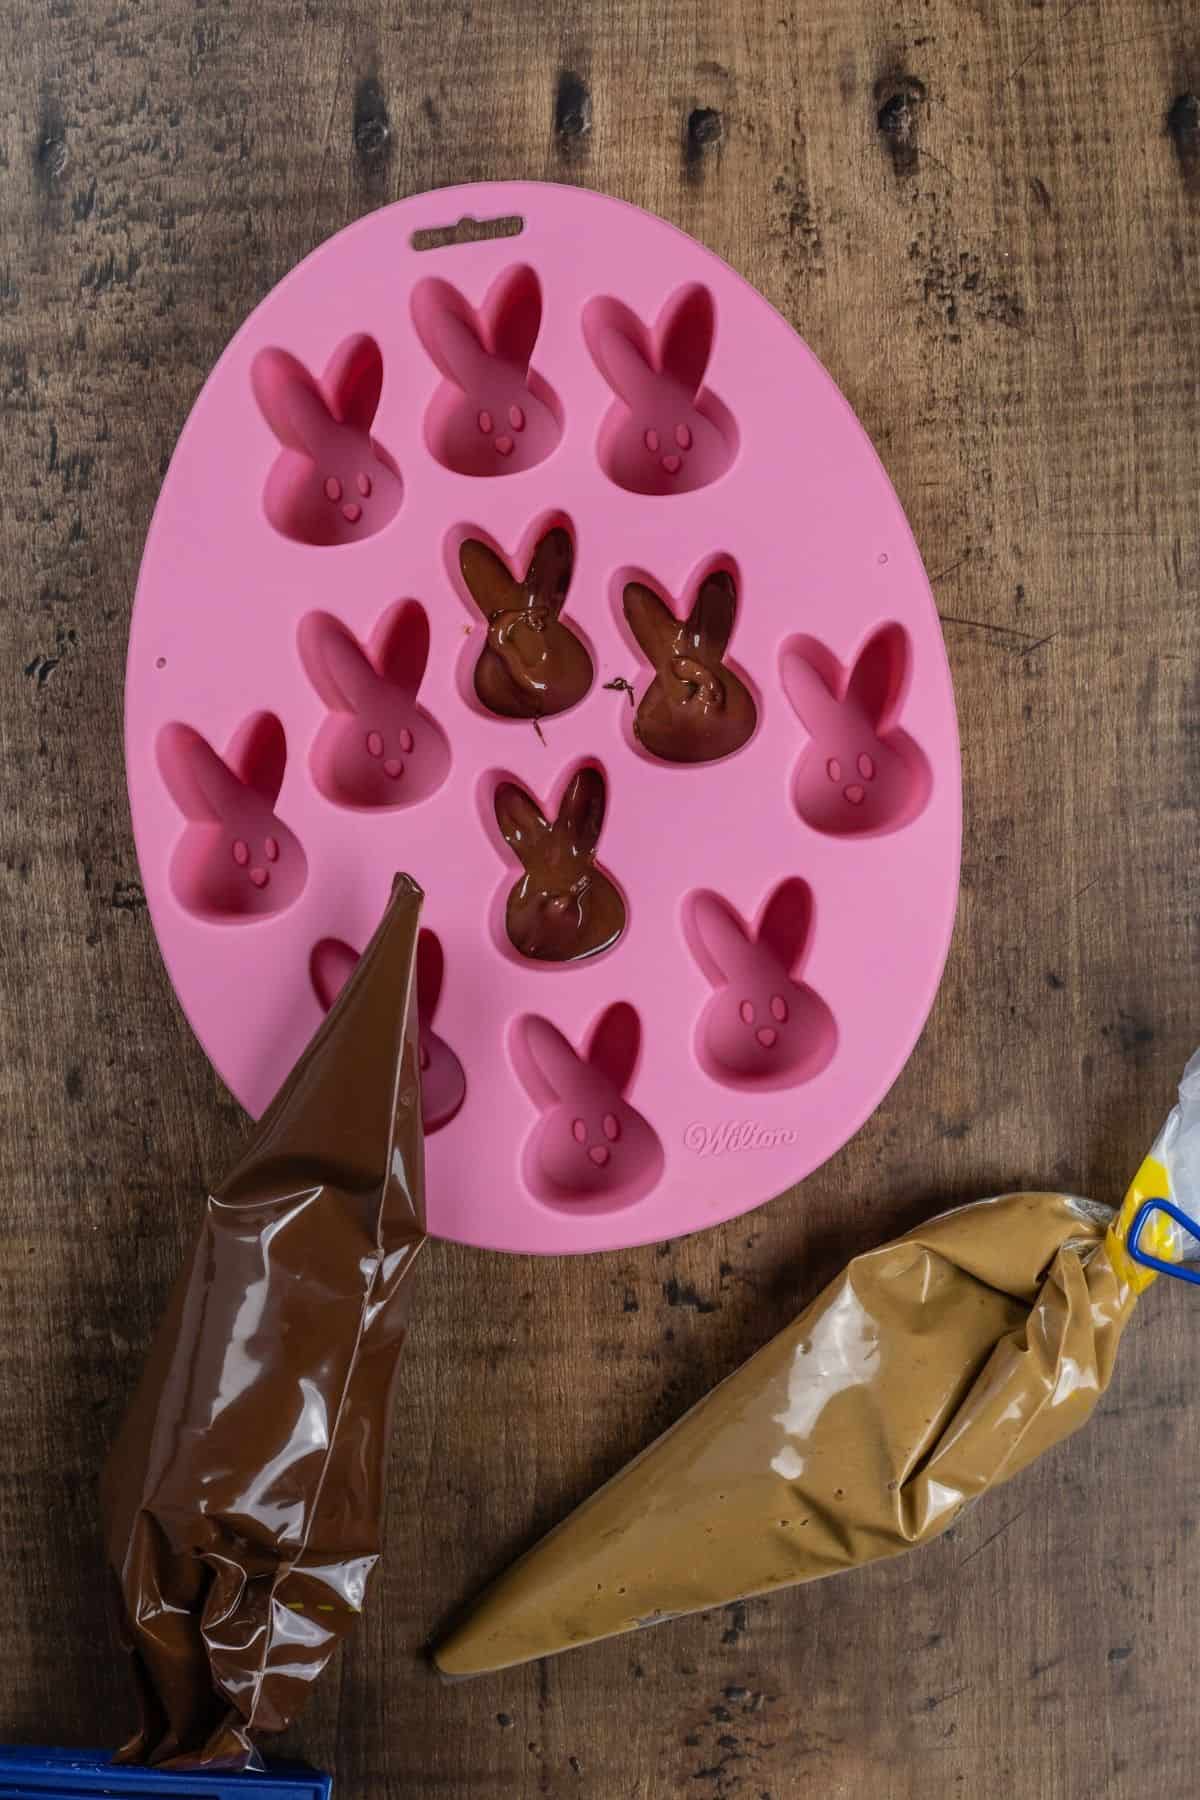 A pink bunny candy mold is being filled with a first layer of chocolate. It rests on a wood table. 2 piping bags are next to it, one filled with chocolate and the other with the sunbutter filling.